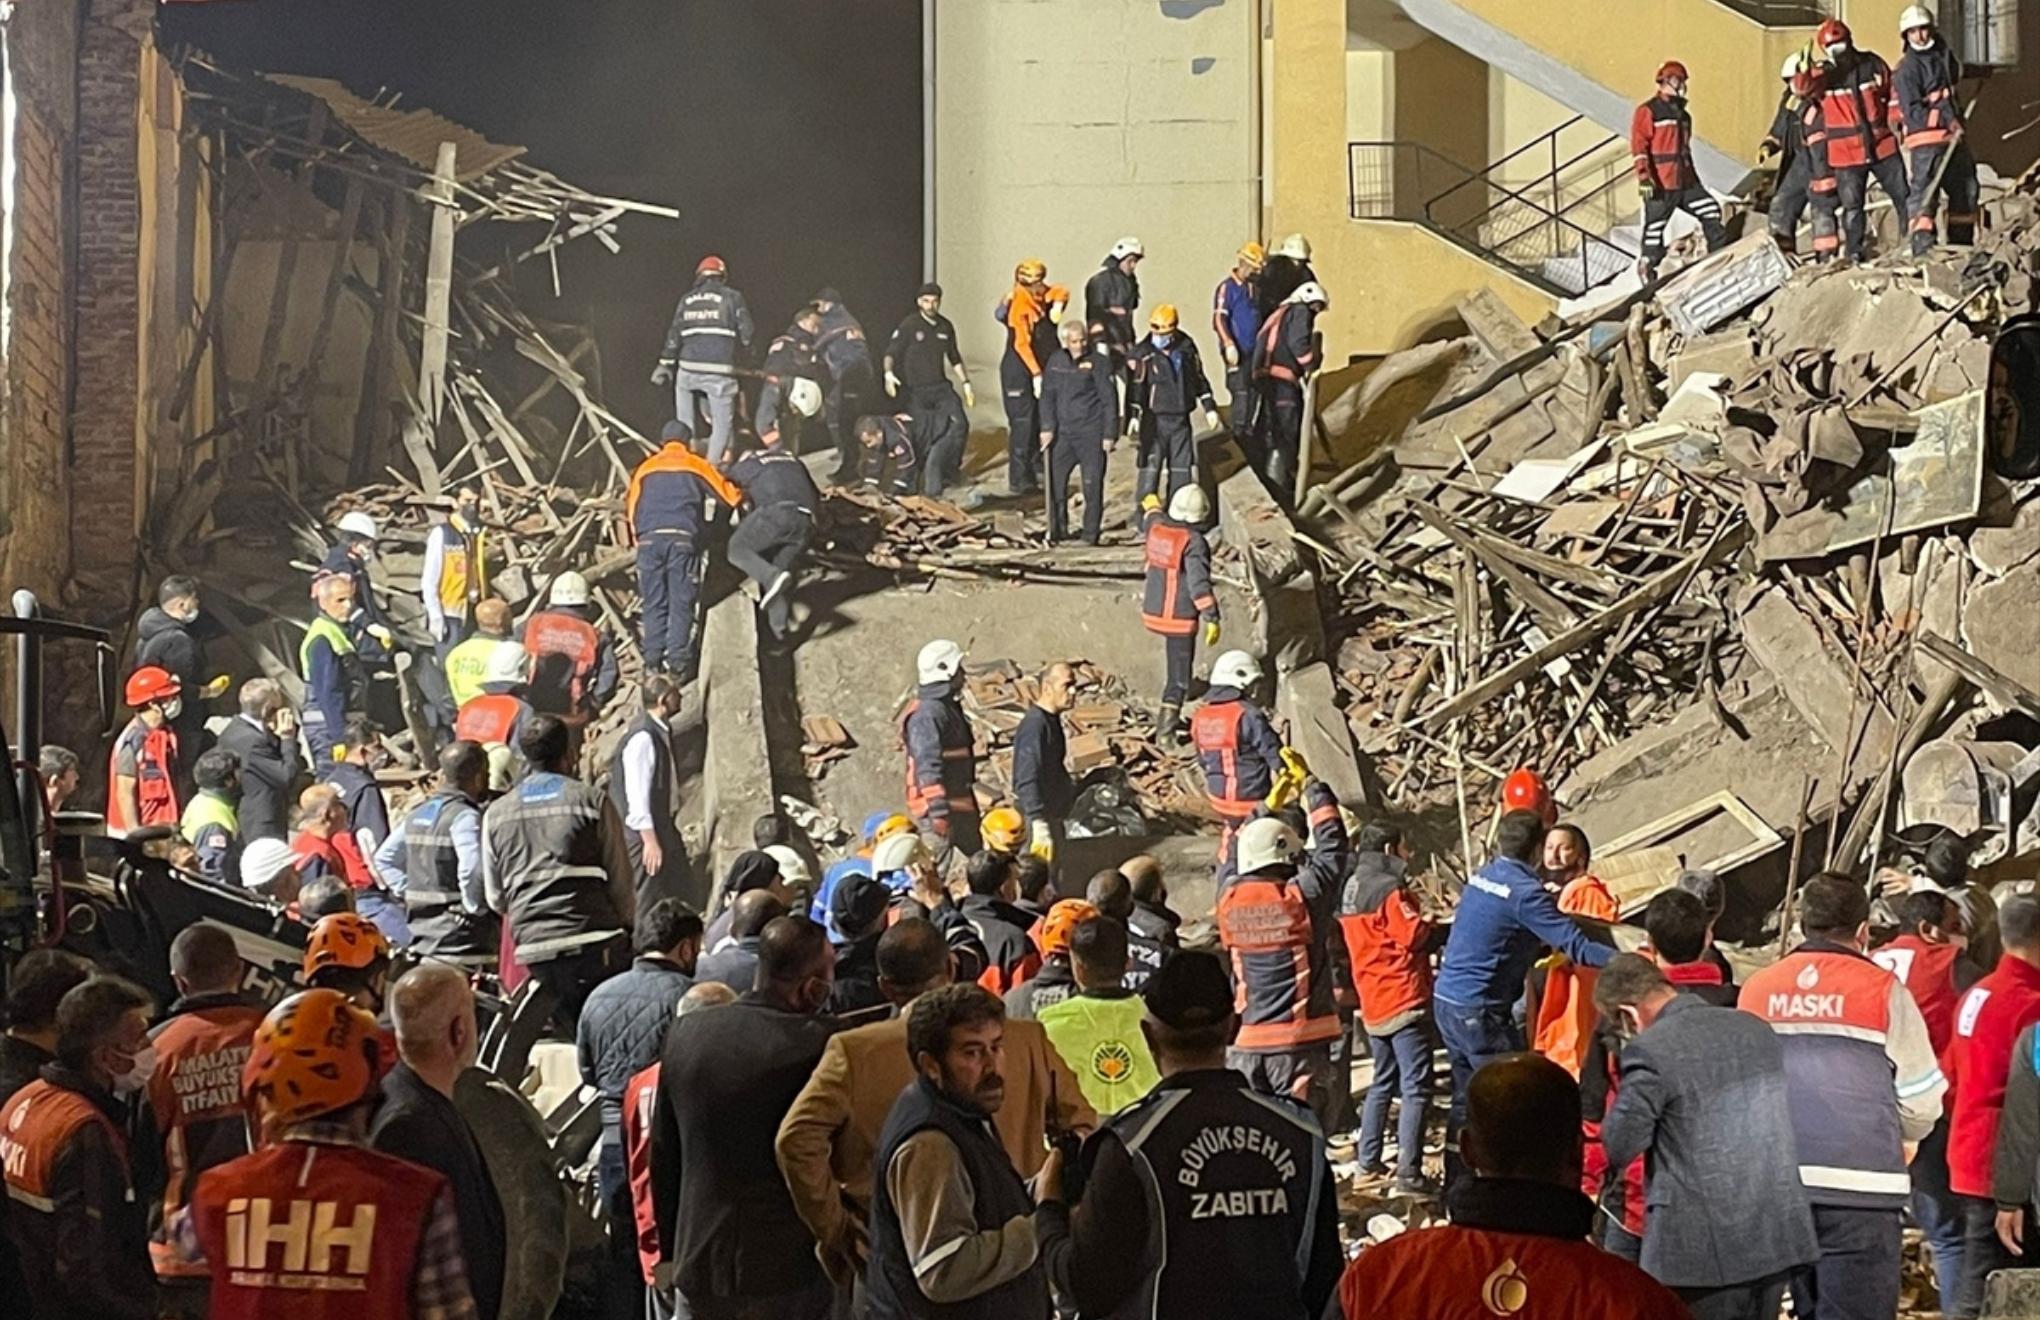 Building collapses in Malatya: 13 people survive with injuries